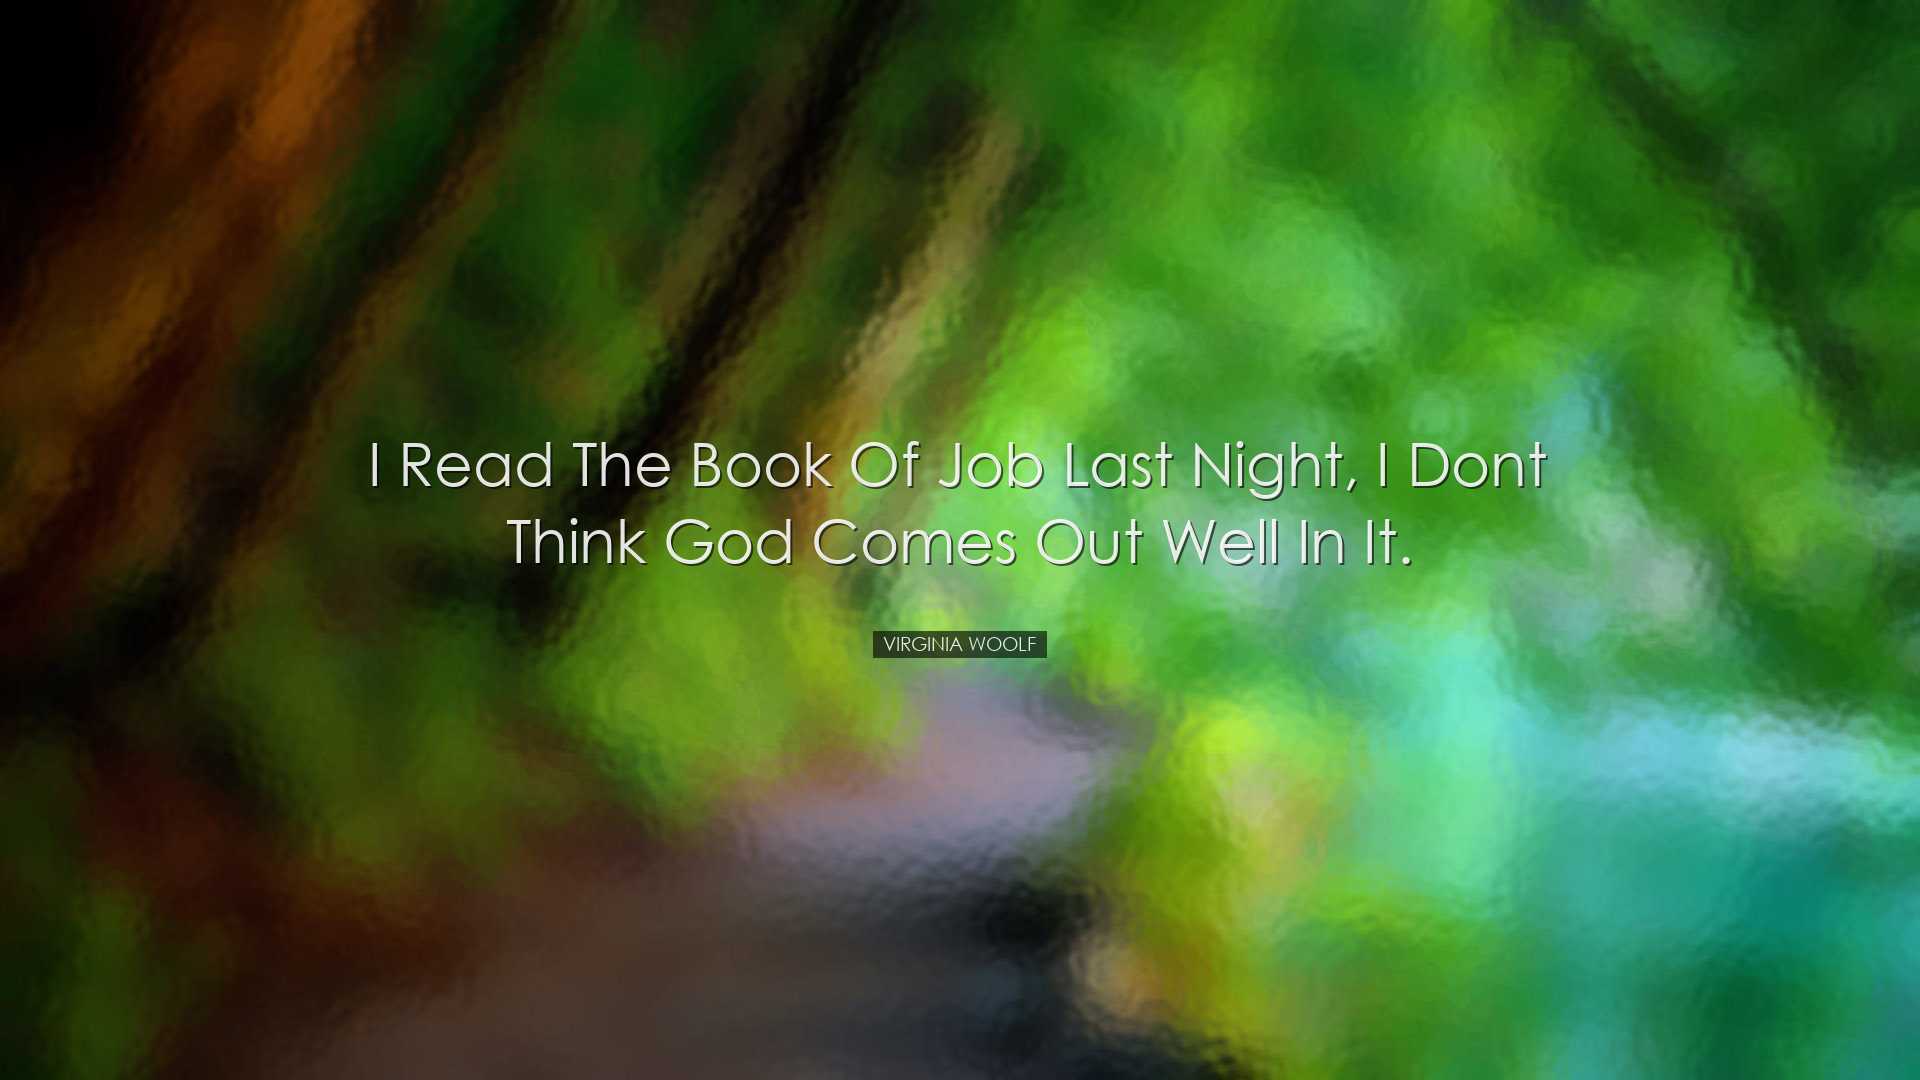 I read the book of Job last night, I dont think God comes out well